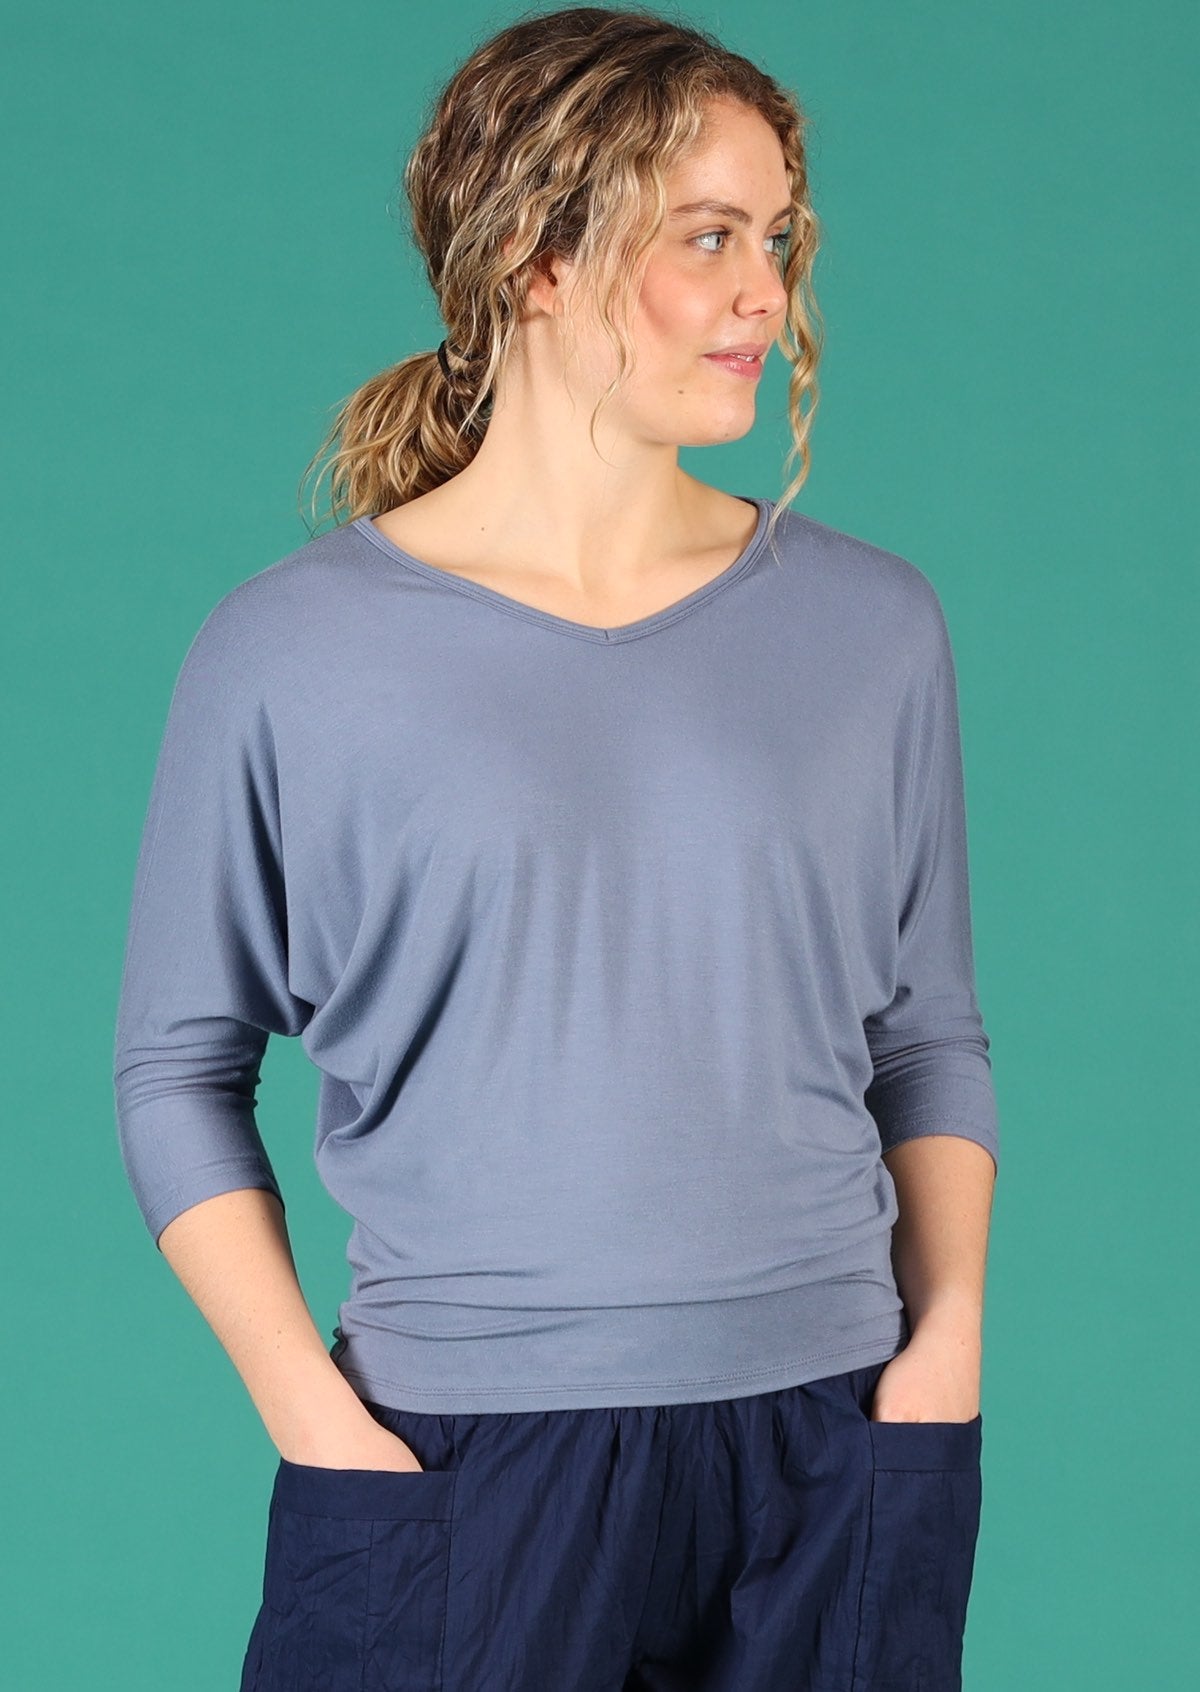 Woman with blonde curly hair wearing a 3/4 sleeve rayon batwing v-neck grey top.